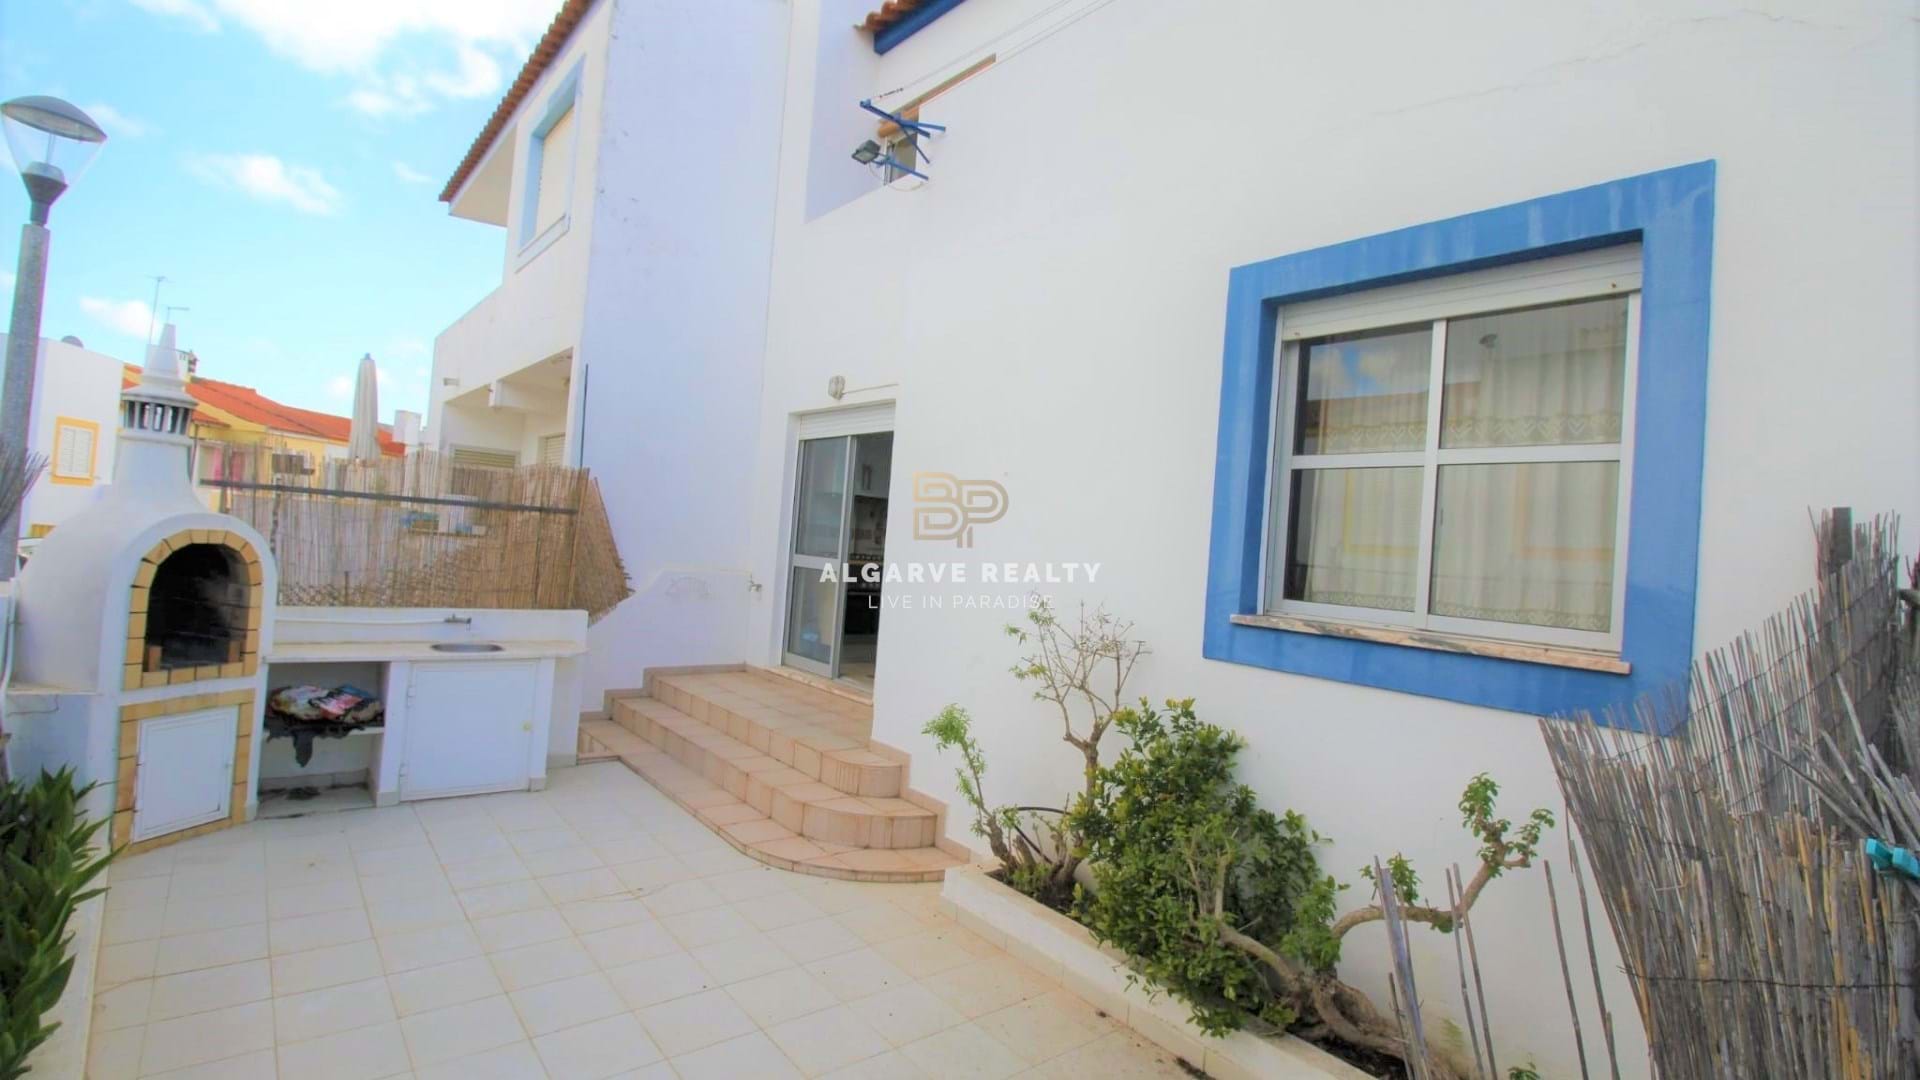 Estombar - Lagoa - SALE - House in band T3 with patio - OPPORTUNITY